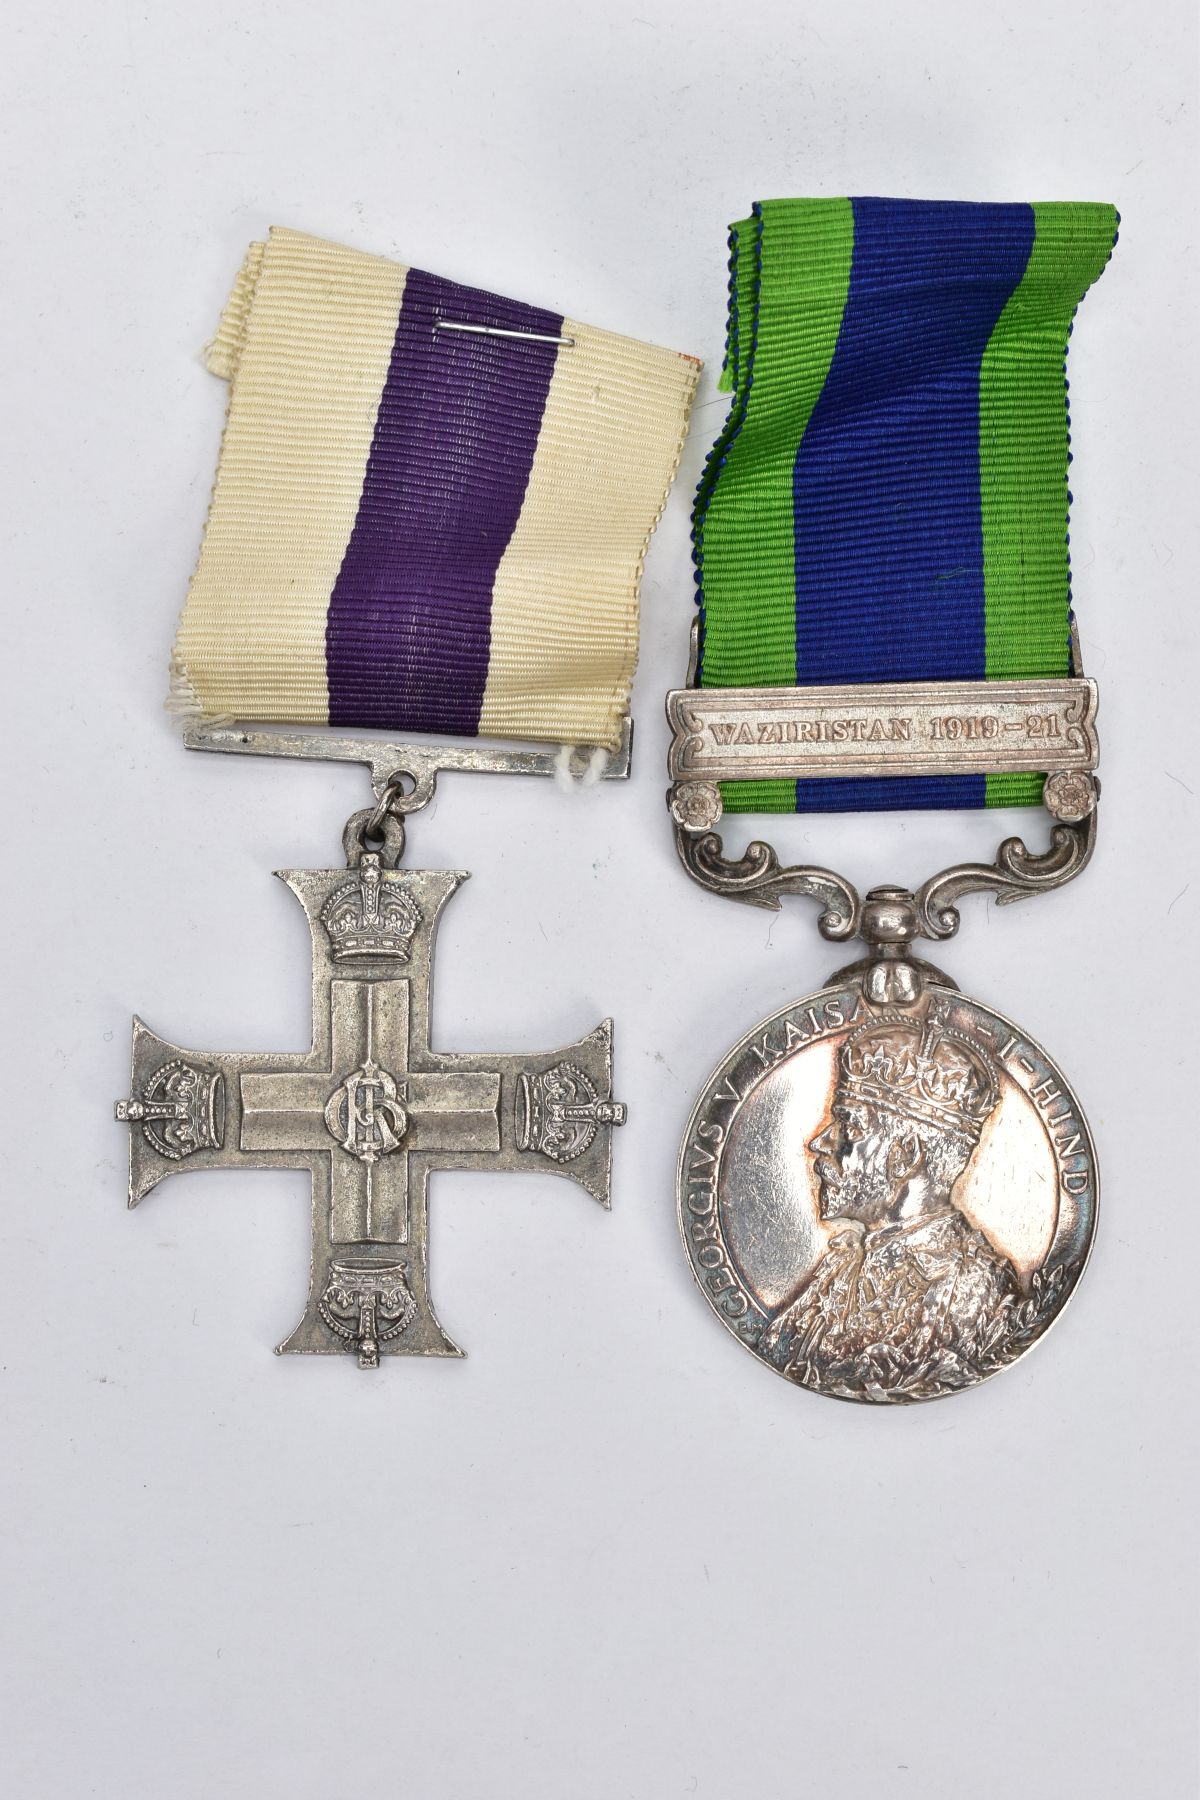 AN INDIA GENERAL SERVICE MEDAL 1909 AND A REPRODUCTION GEO V MILITARY CROSS, the GSM is named 2631